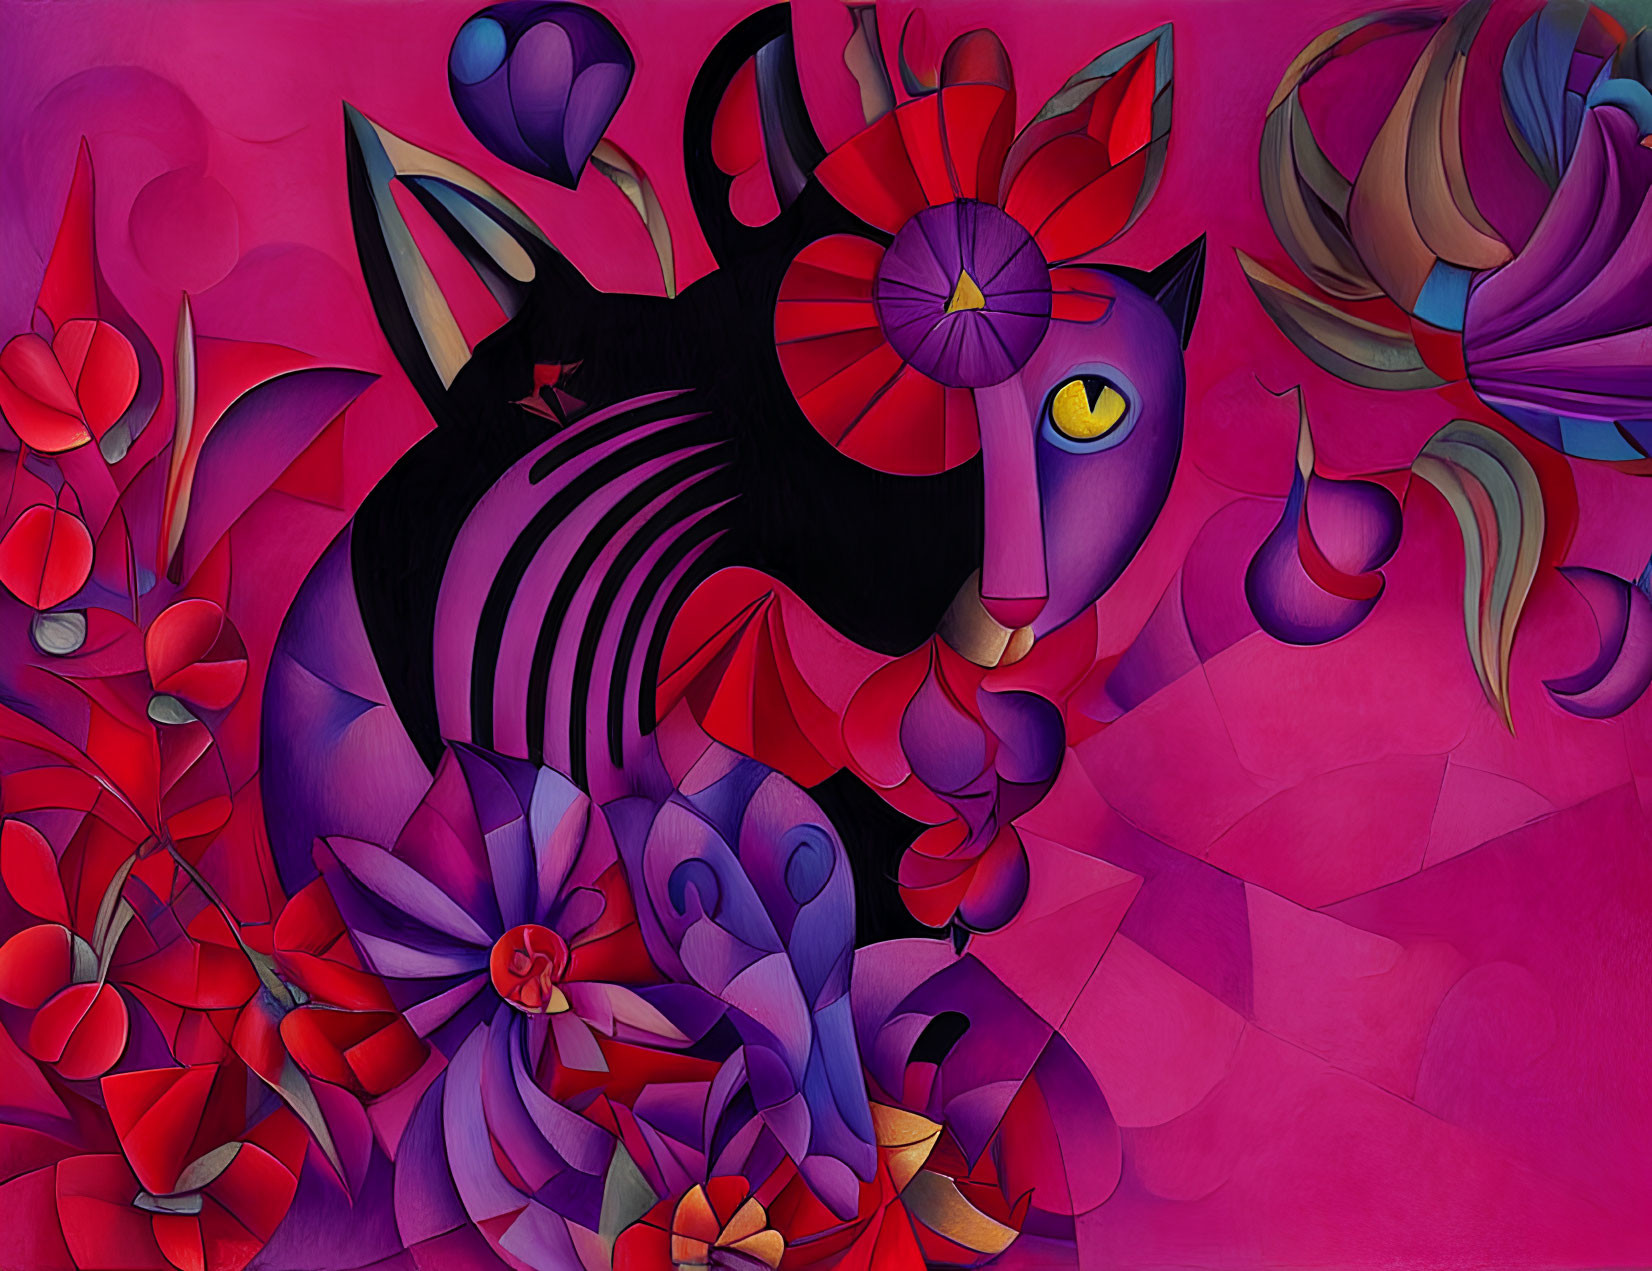 Abstract Stylized Cat with Colorful Floral Patterns on Red Background